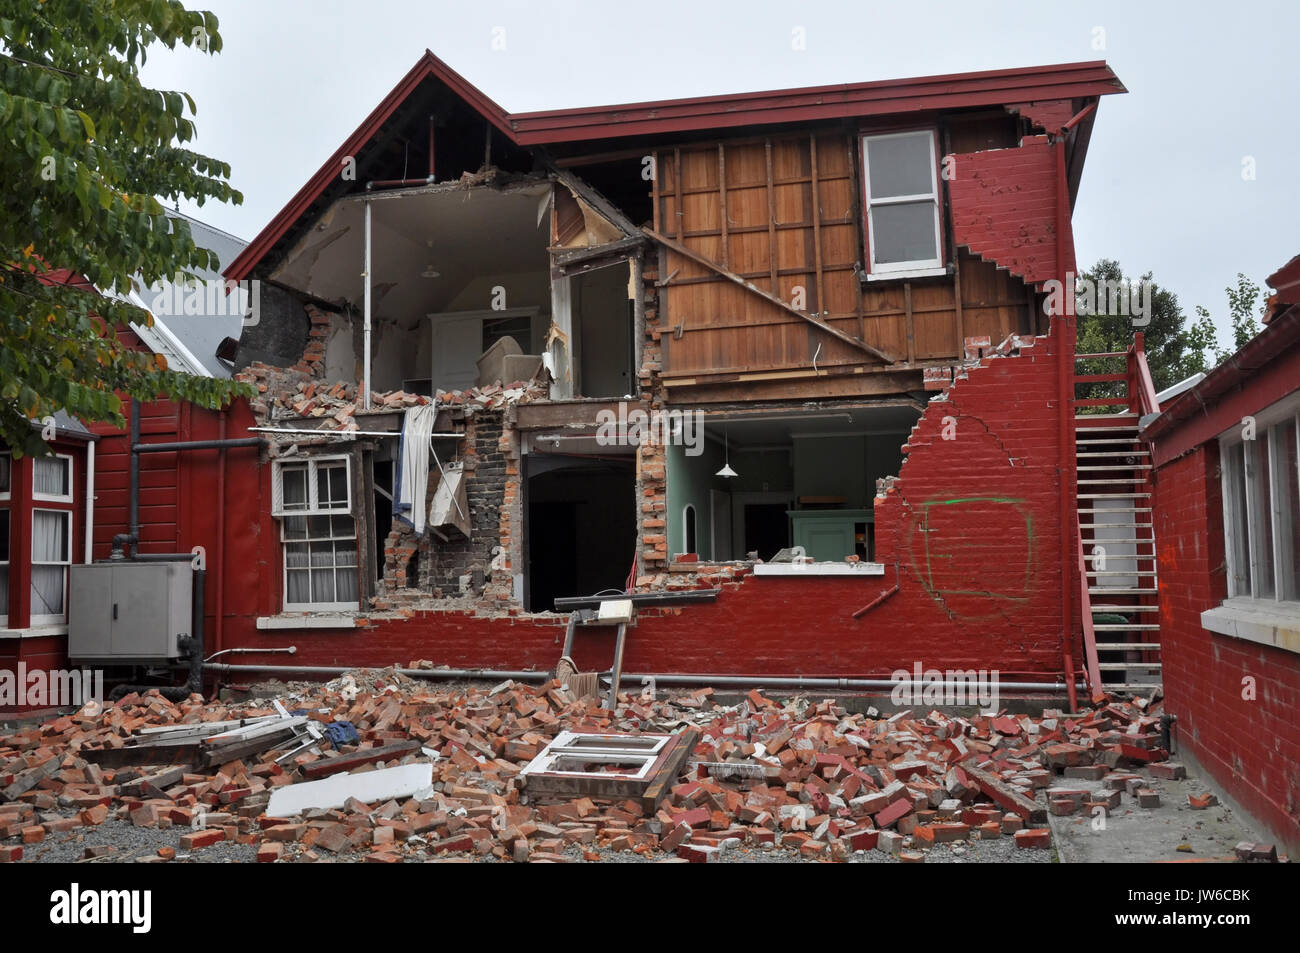 Christchurch, New Zealand - March 12, 2011: A brick house on historic Cranmer Square collapses from the impact of the massive  earthquake on March 12, Stock Photo